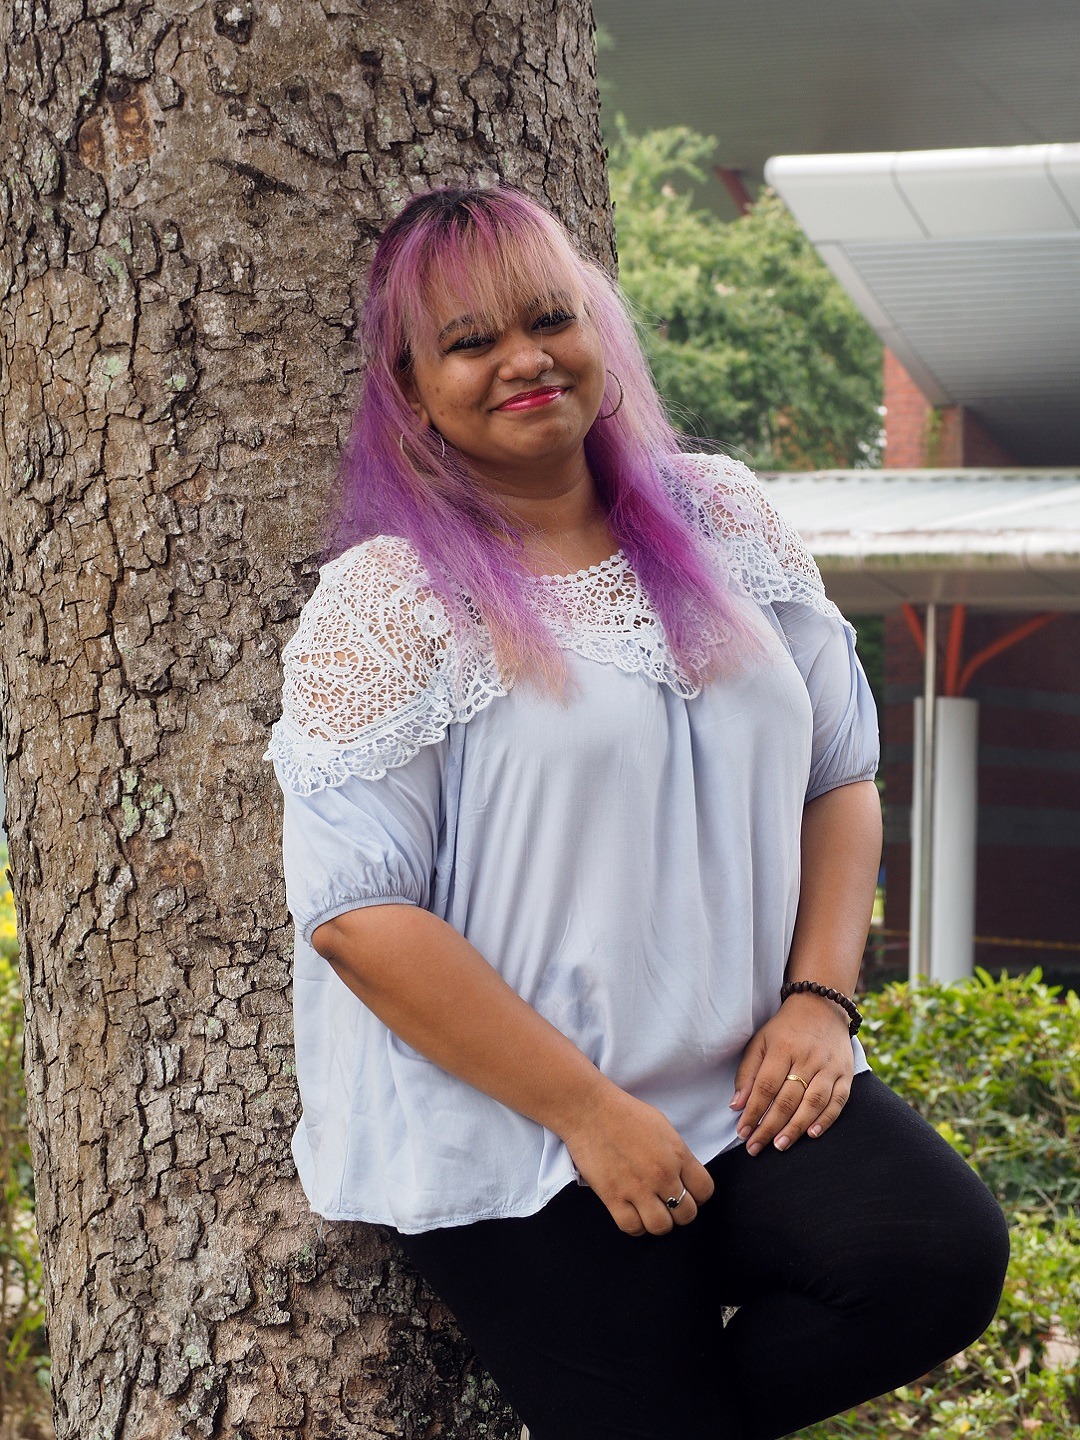 “When I first joined Curtin Malaysia, I thought being a university student was all work and no play, but I was happy to discover that wasn’t the case. “In fact, my experience as a student has been beyond my imagination and my outlook on student life...